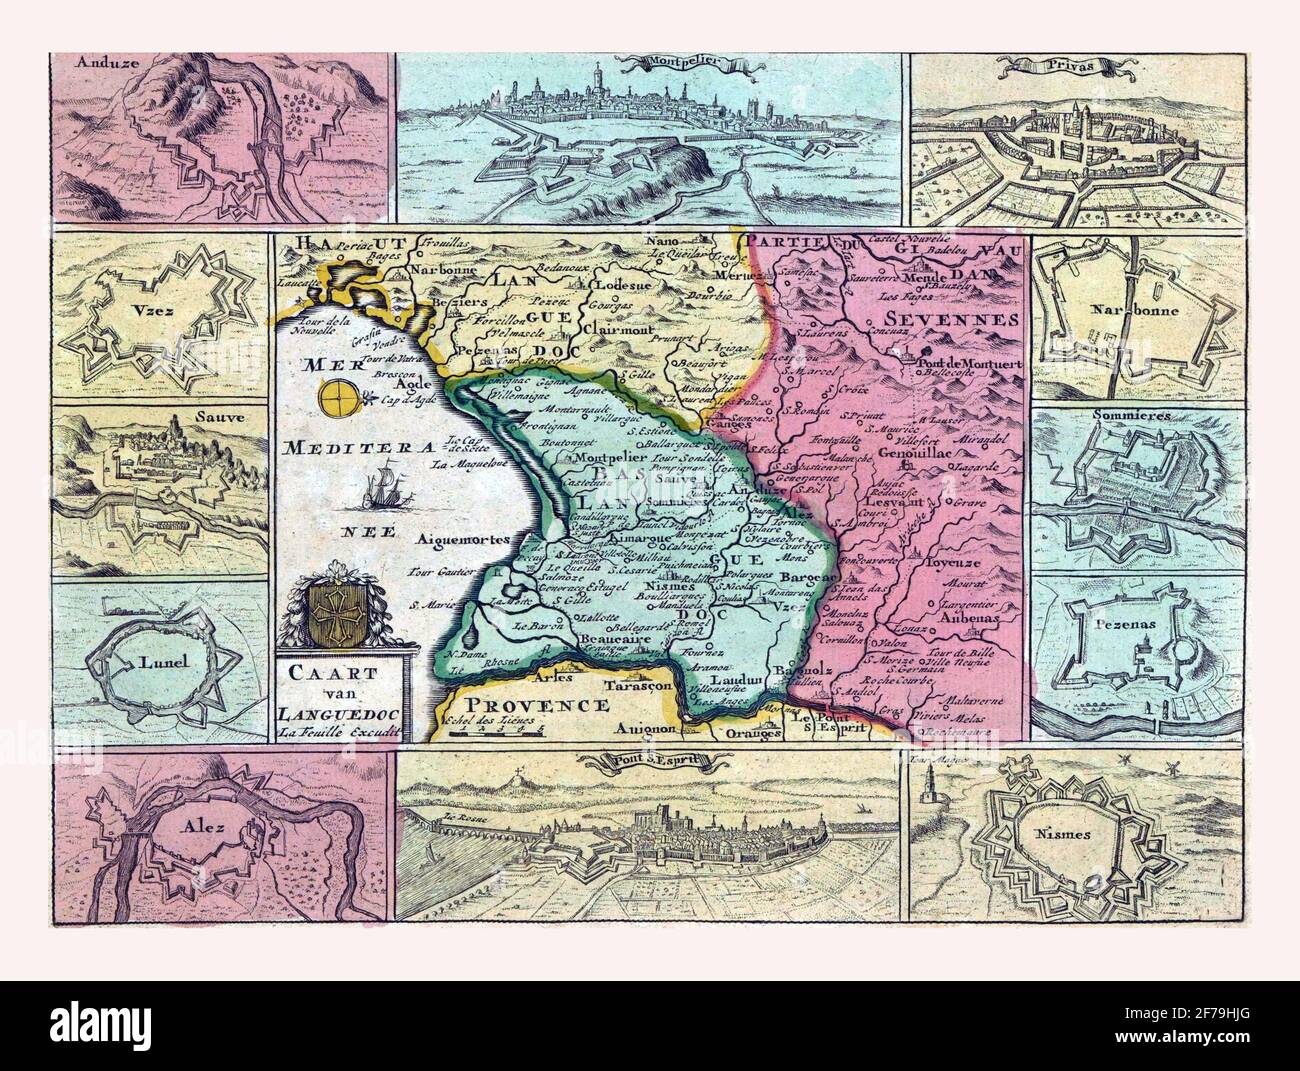 Map of Languedoc, vintage engraving. Stock Photo